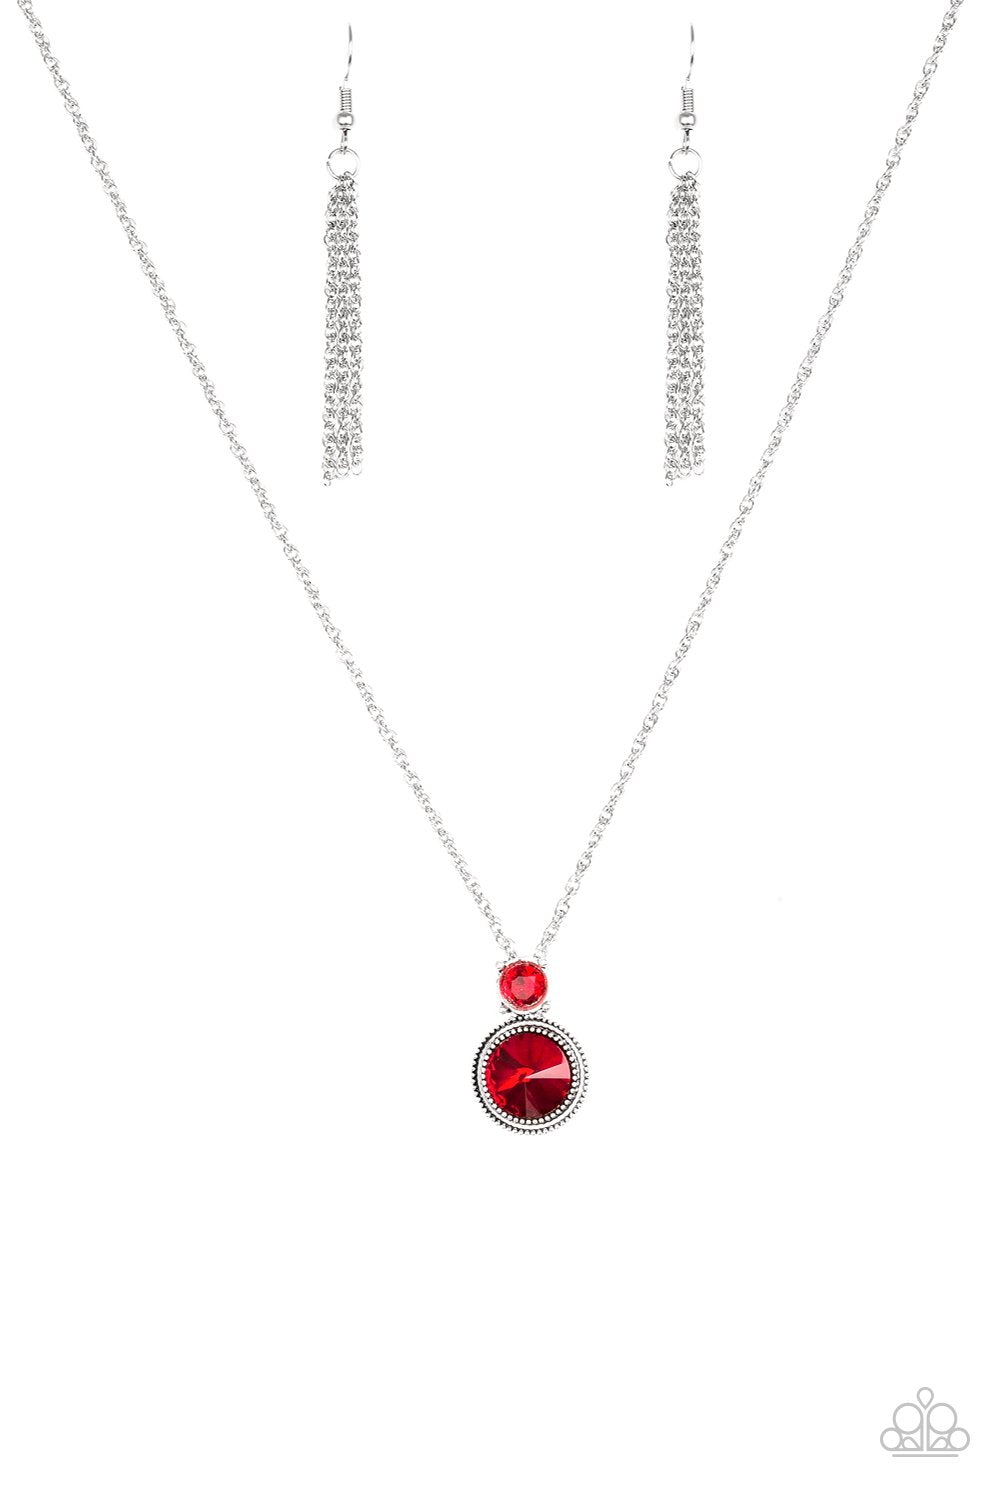 Paparazzi Necklace ~ Date Night Dazzle - Red